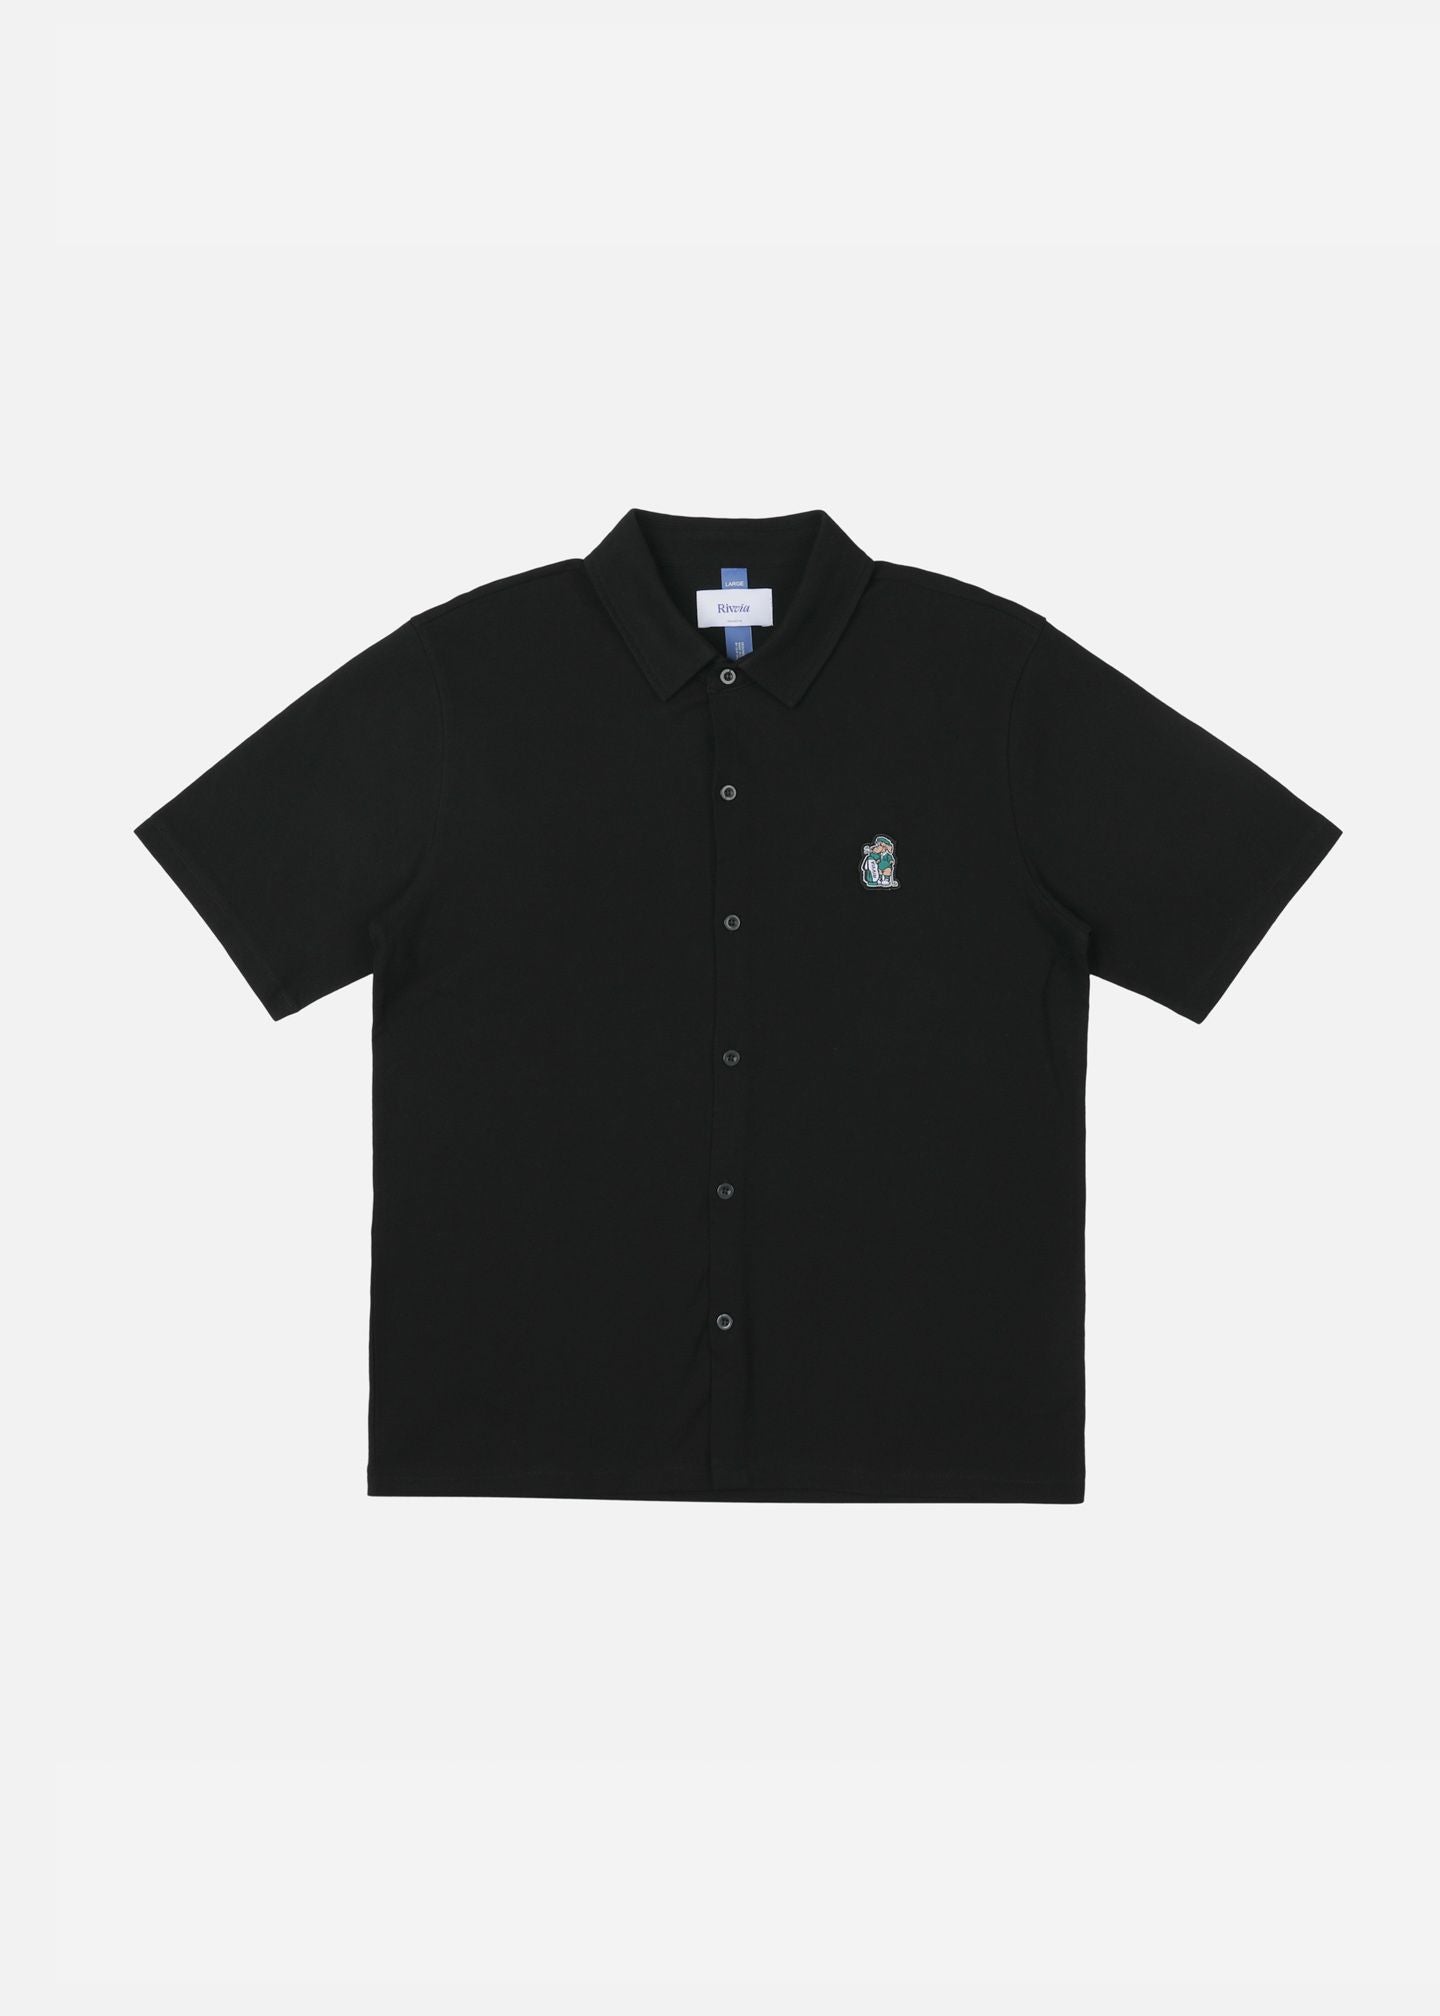 IN THE ROUGH SHIRT : BLACK – Rivvia Projects